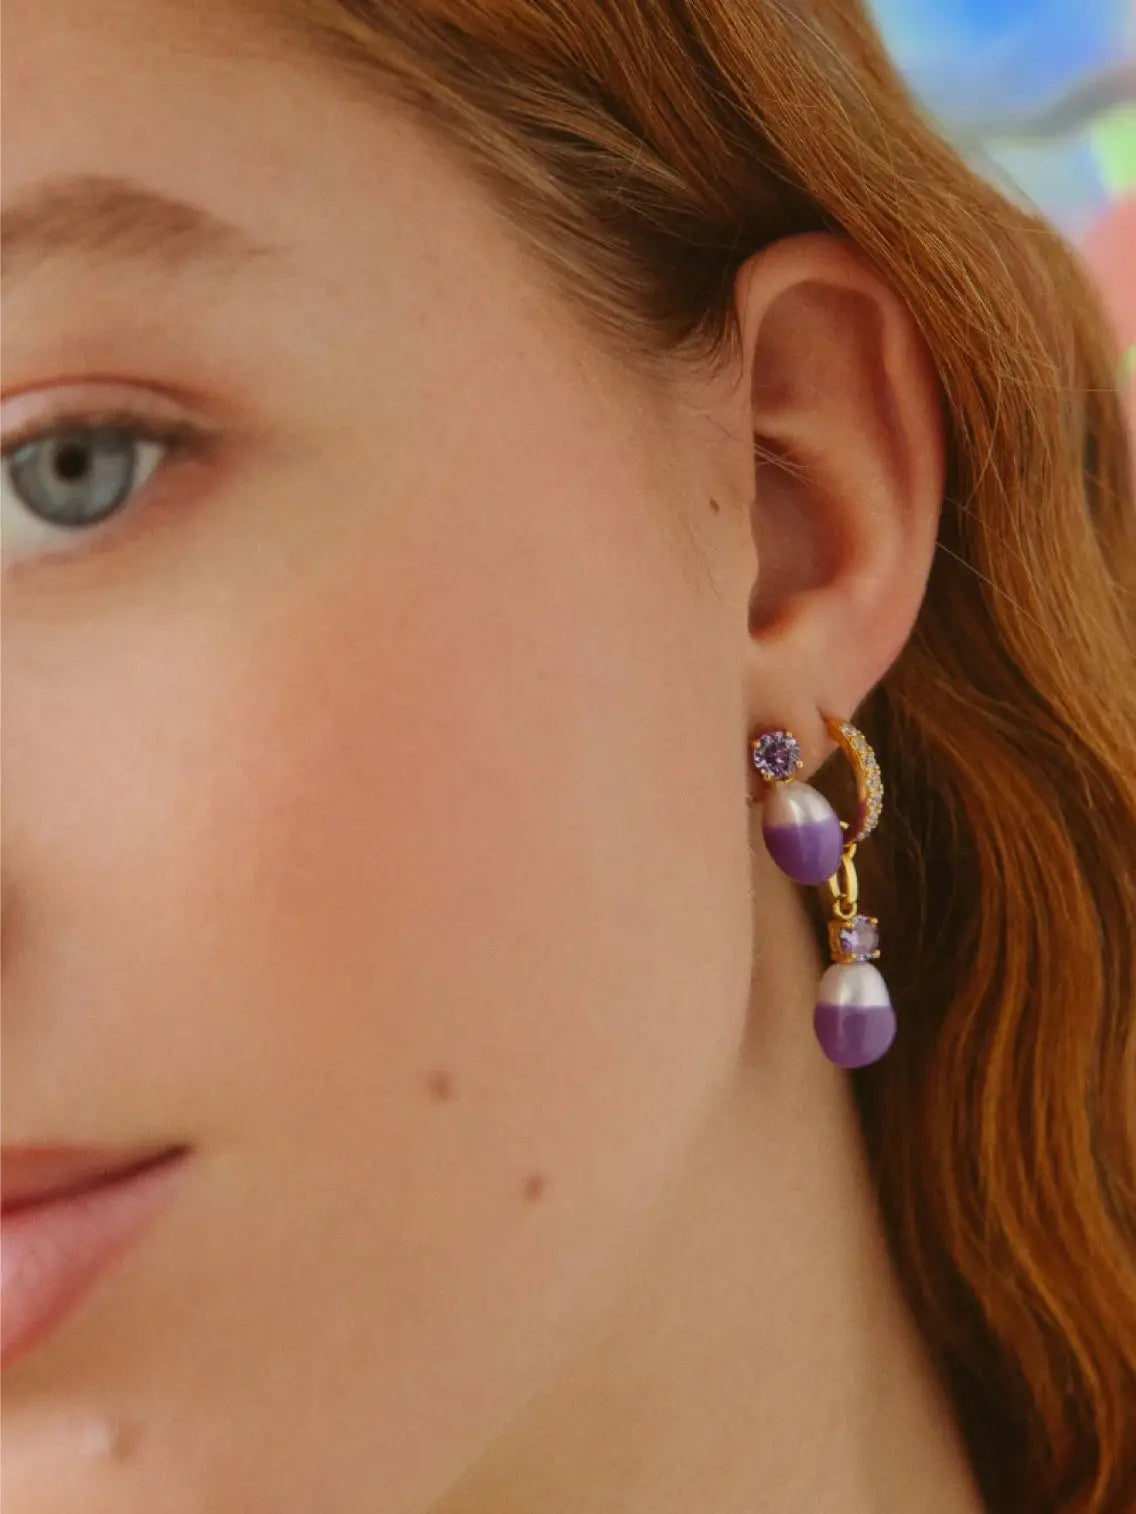 A single gold earring adorned with small diamonds along the hoop. The Grape Swan Lake Pearl Hoop Earring by Wilhelmina Garcia, available at Bassalstore in Barcelona, features a dangling purple gemstone above a purple and white bead.